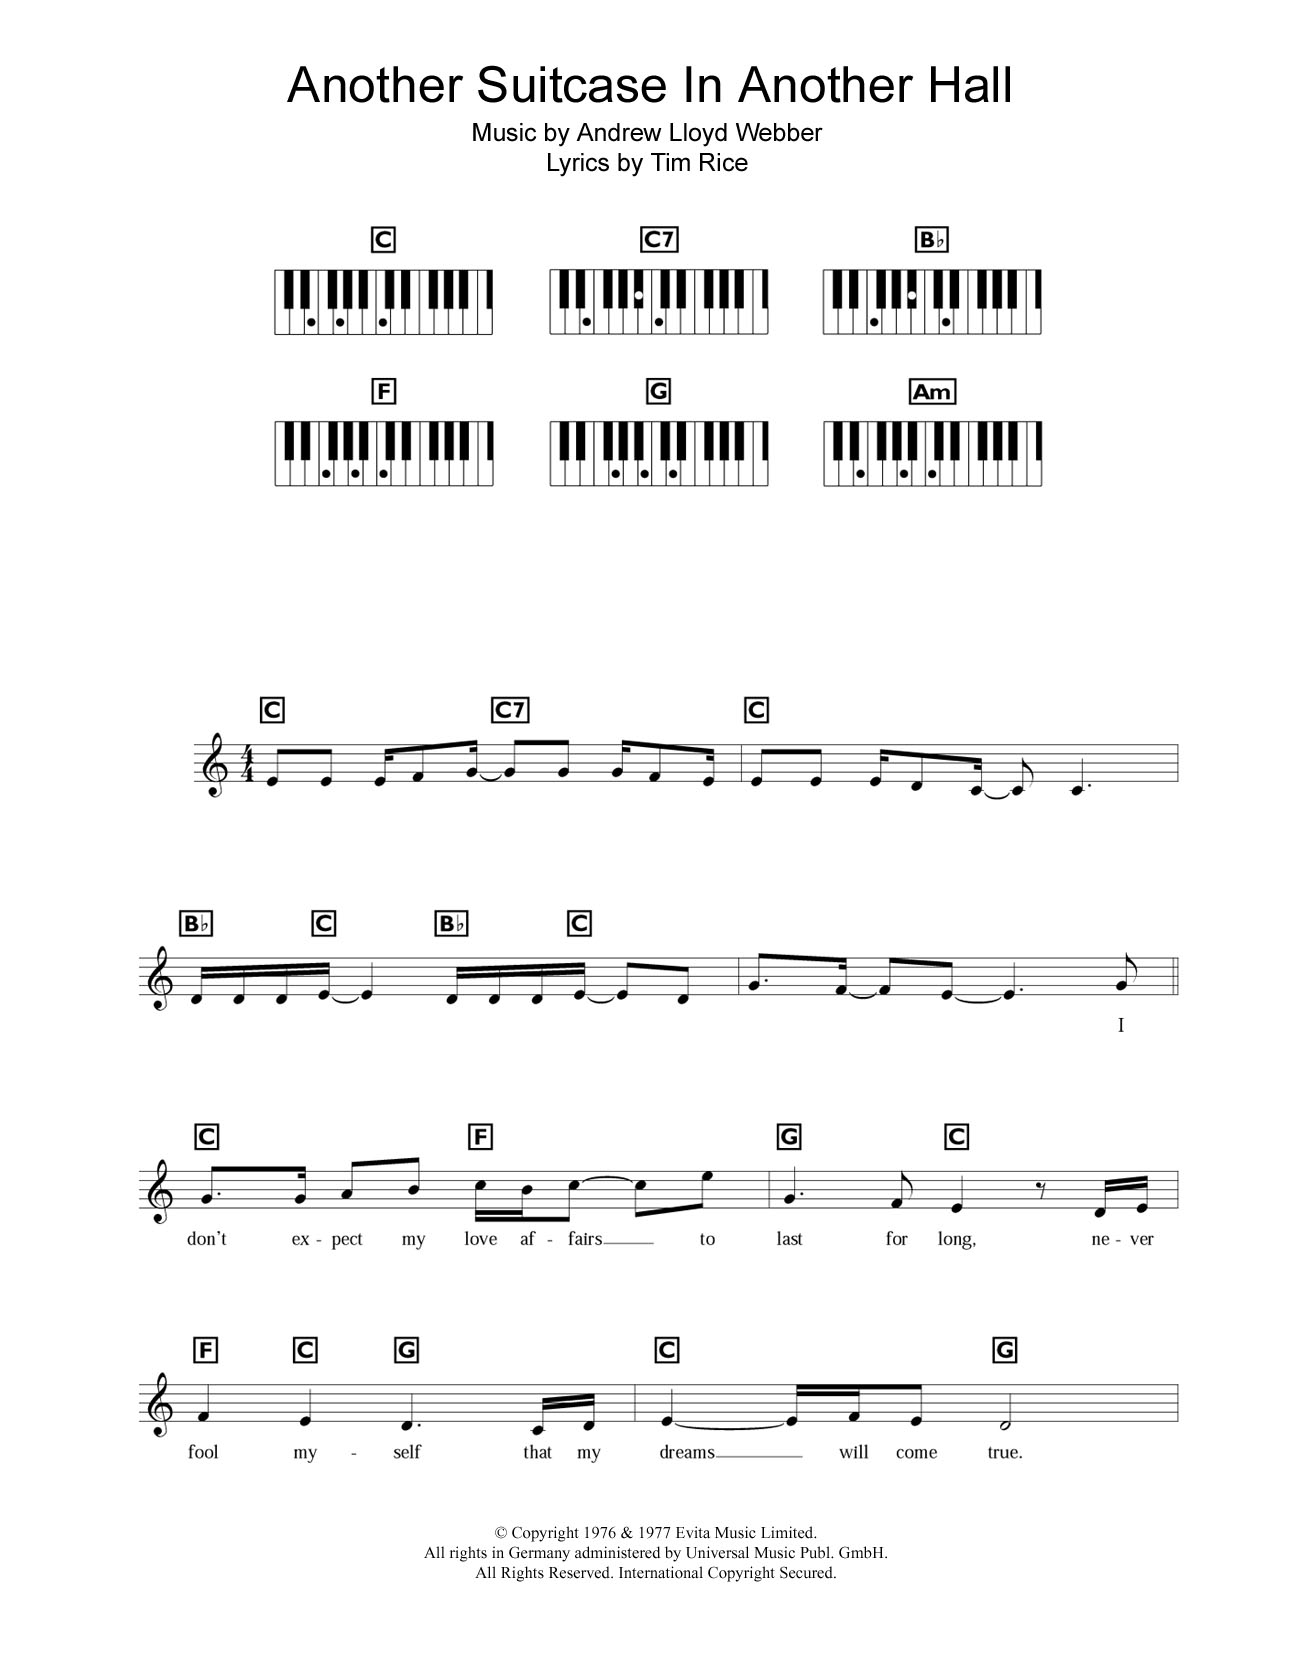 Download Andrew Lloyd Webber Another Suitcase In Another Hall (from Sheet Music